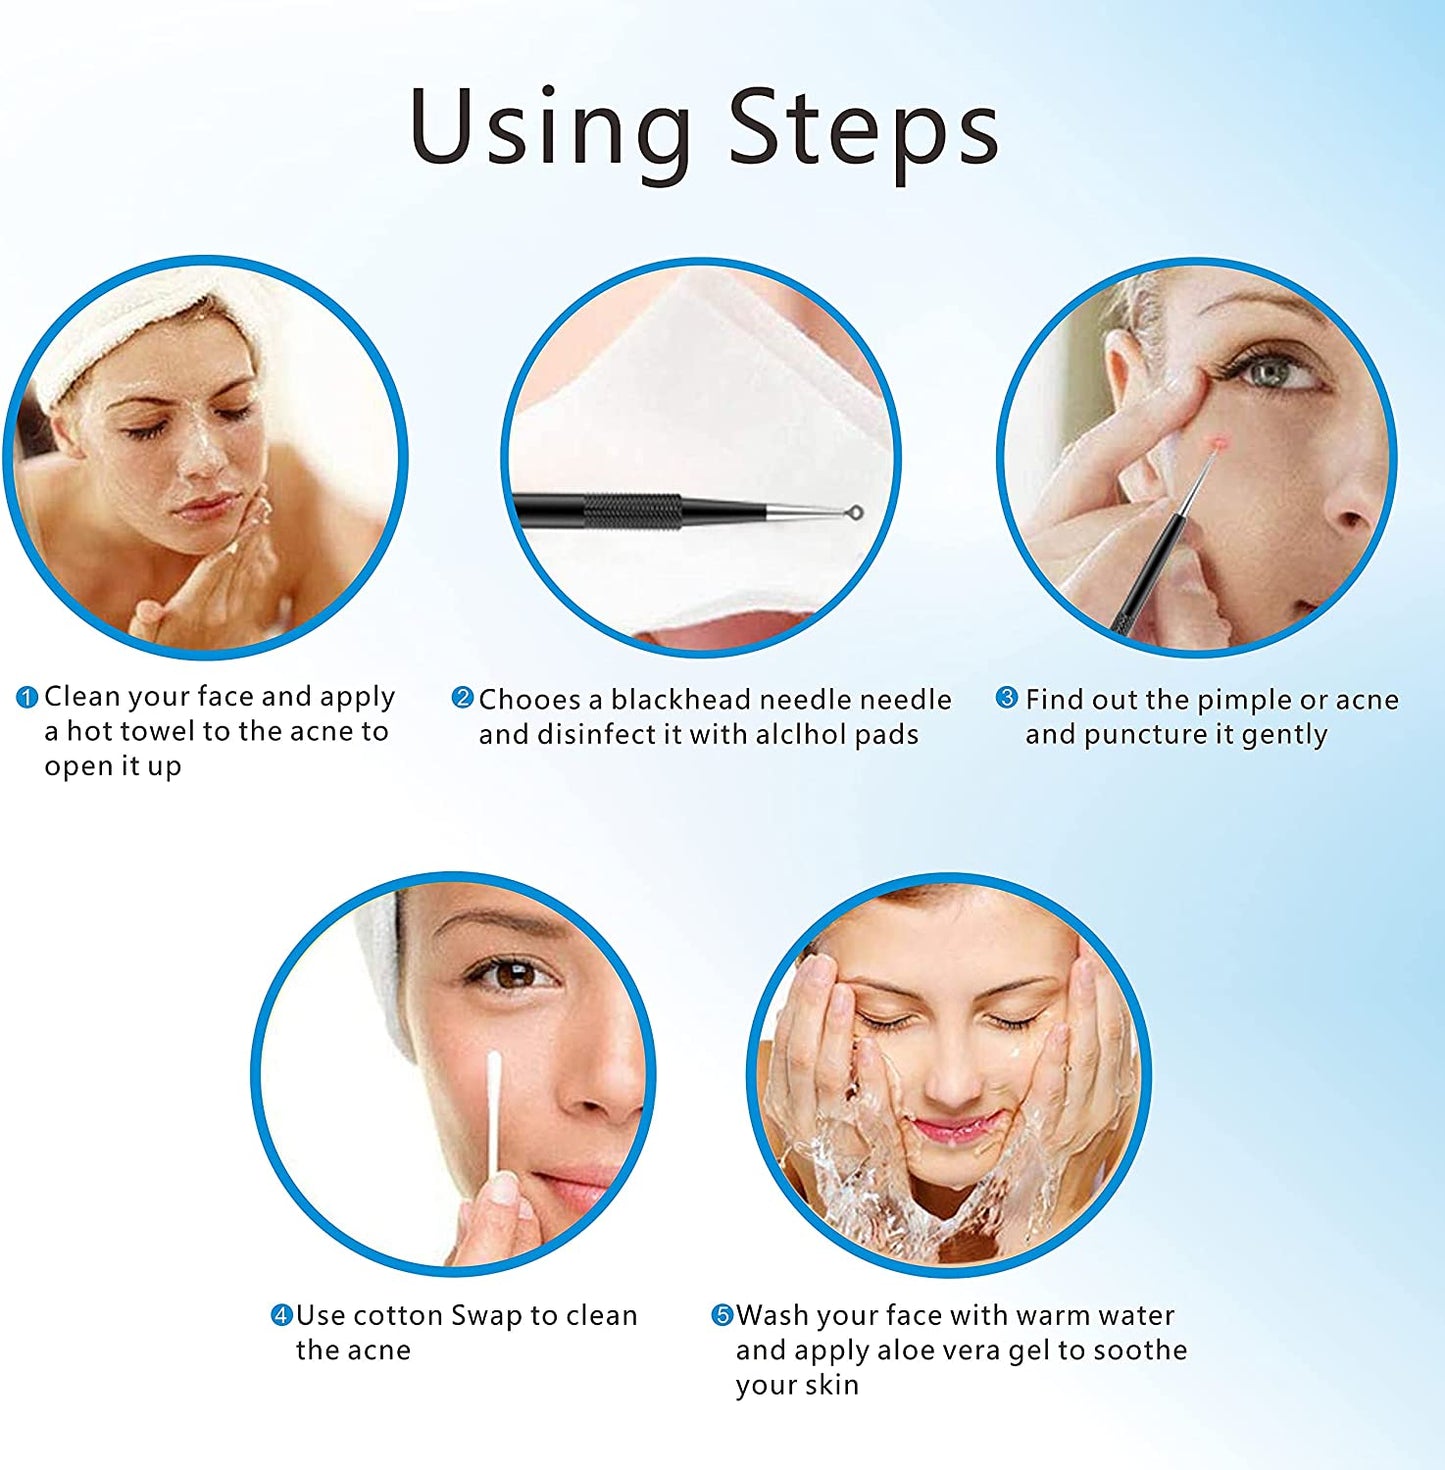 Easy and Effective Removal of Blackheads, Pimples, and Whiteheads on the Face and Nose